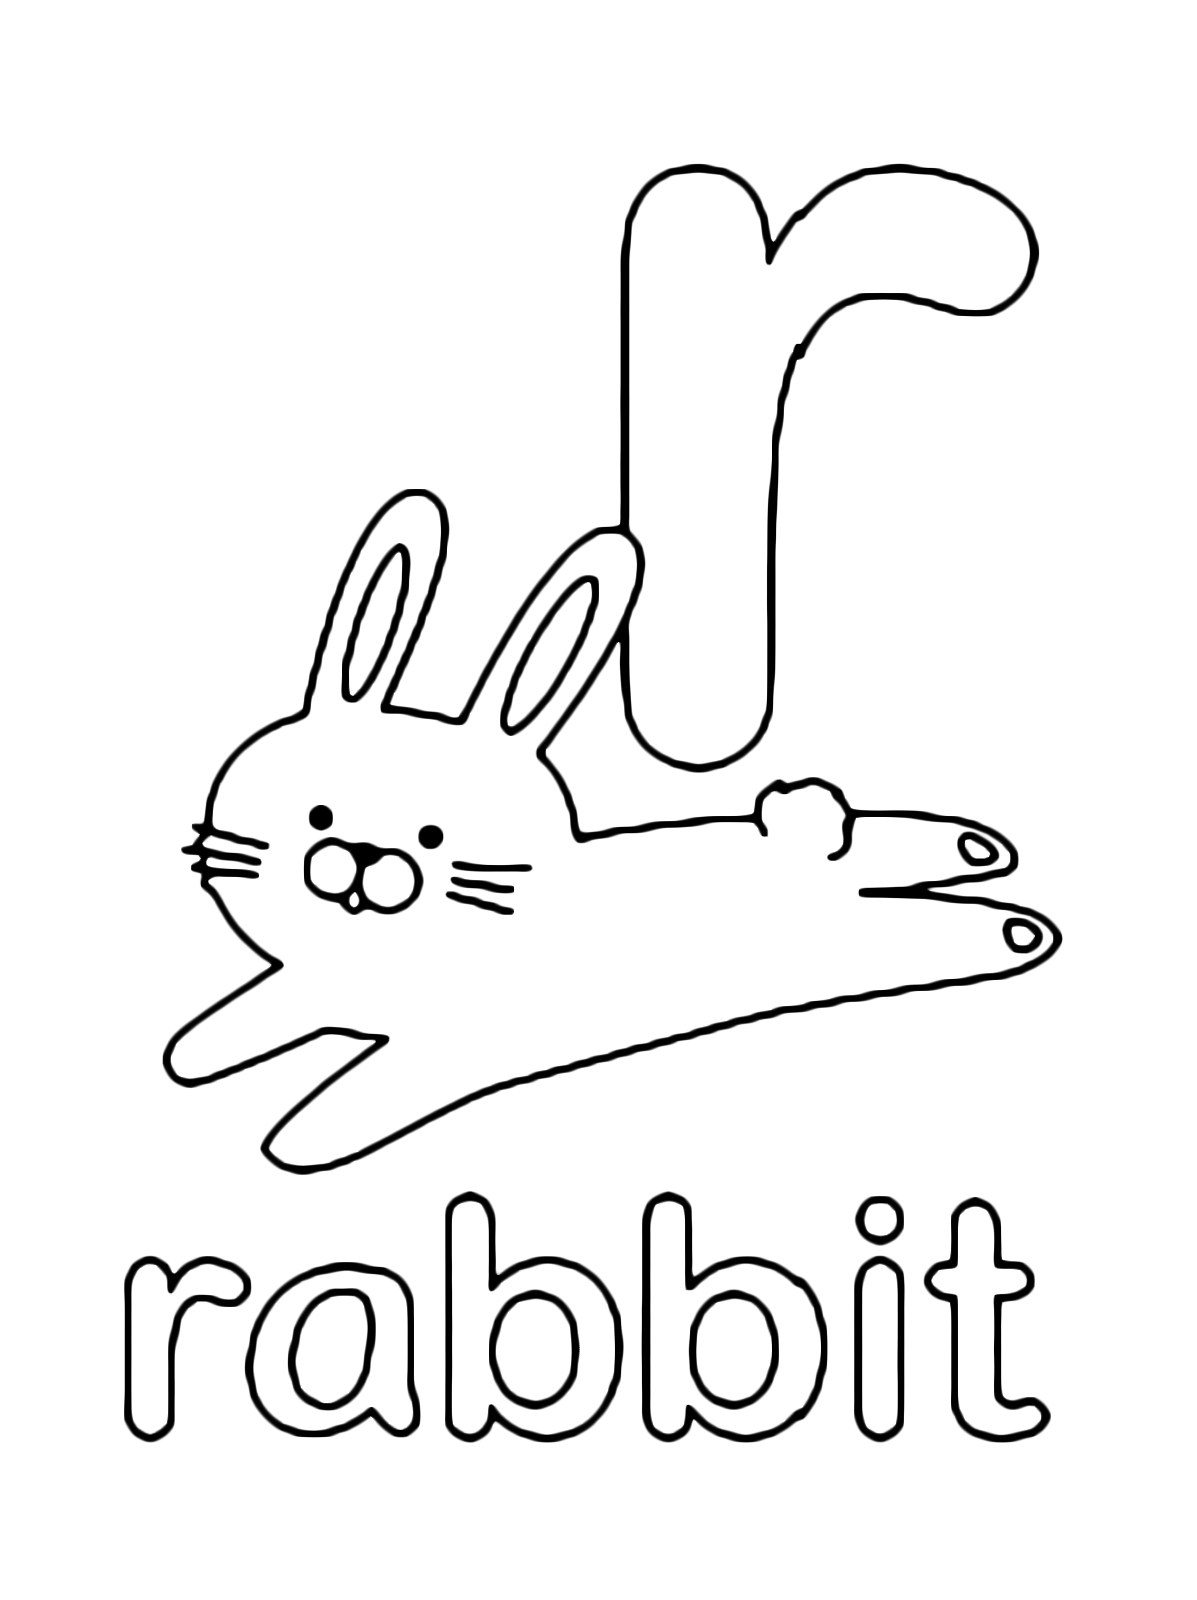 Letters and numbers - r for rabbit lowercase letter